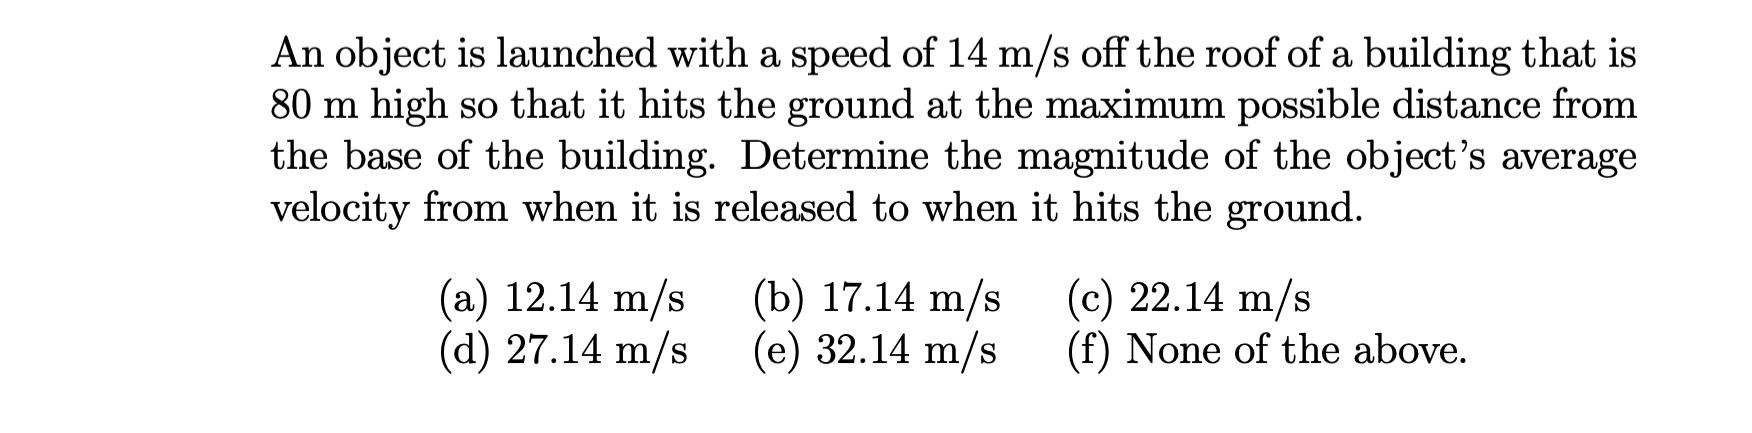 An object is launched with a speed of 14 m/s off the roof of a building that is
80 m high so that it hits the ground at the maximum possible distance from
the base of the building. Determine the magnitude of the object's average
velocity from when it is released to when it hits the ground.
(a) 12.14 m/s
(d) 27.14 m/s
(b) 17.14 m/s
(e) 32.14 m/s
(c) 22.14 m/s
(f) None of the above.
